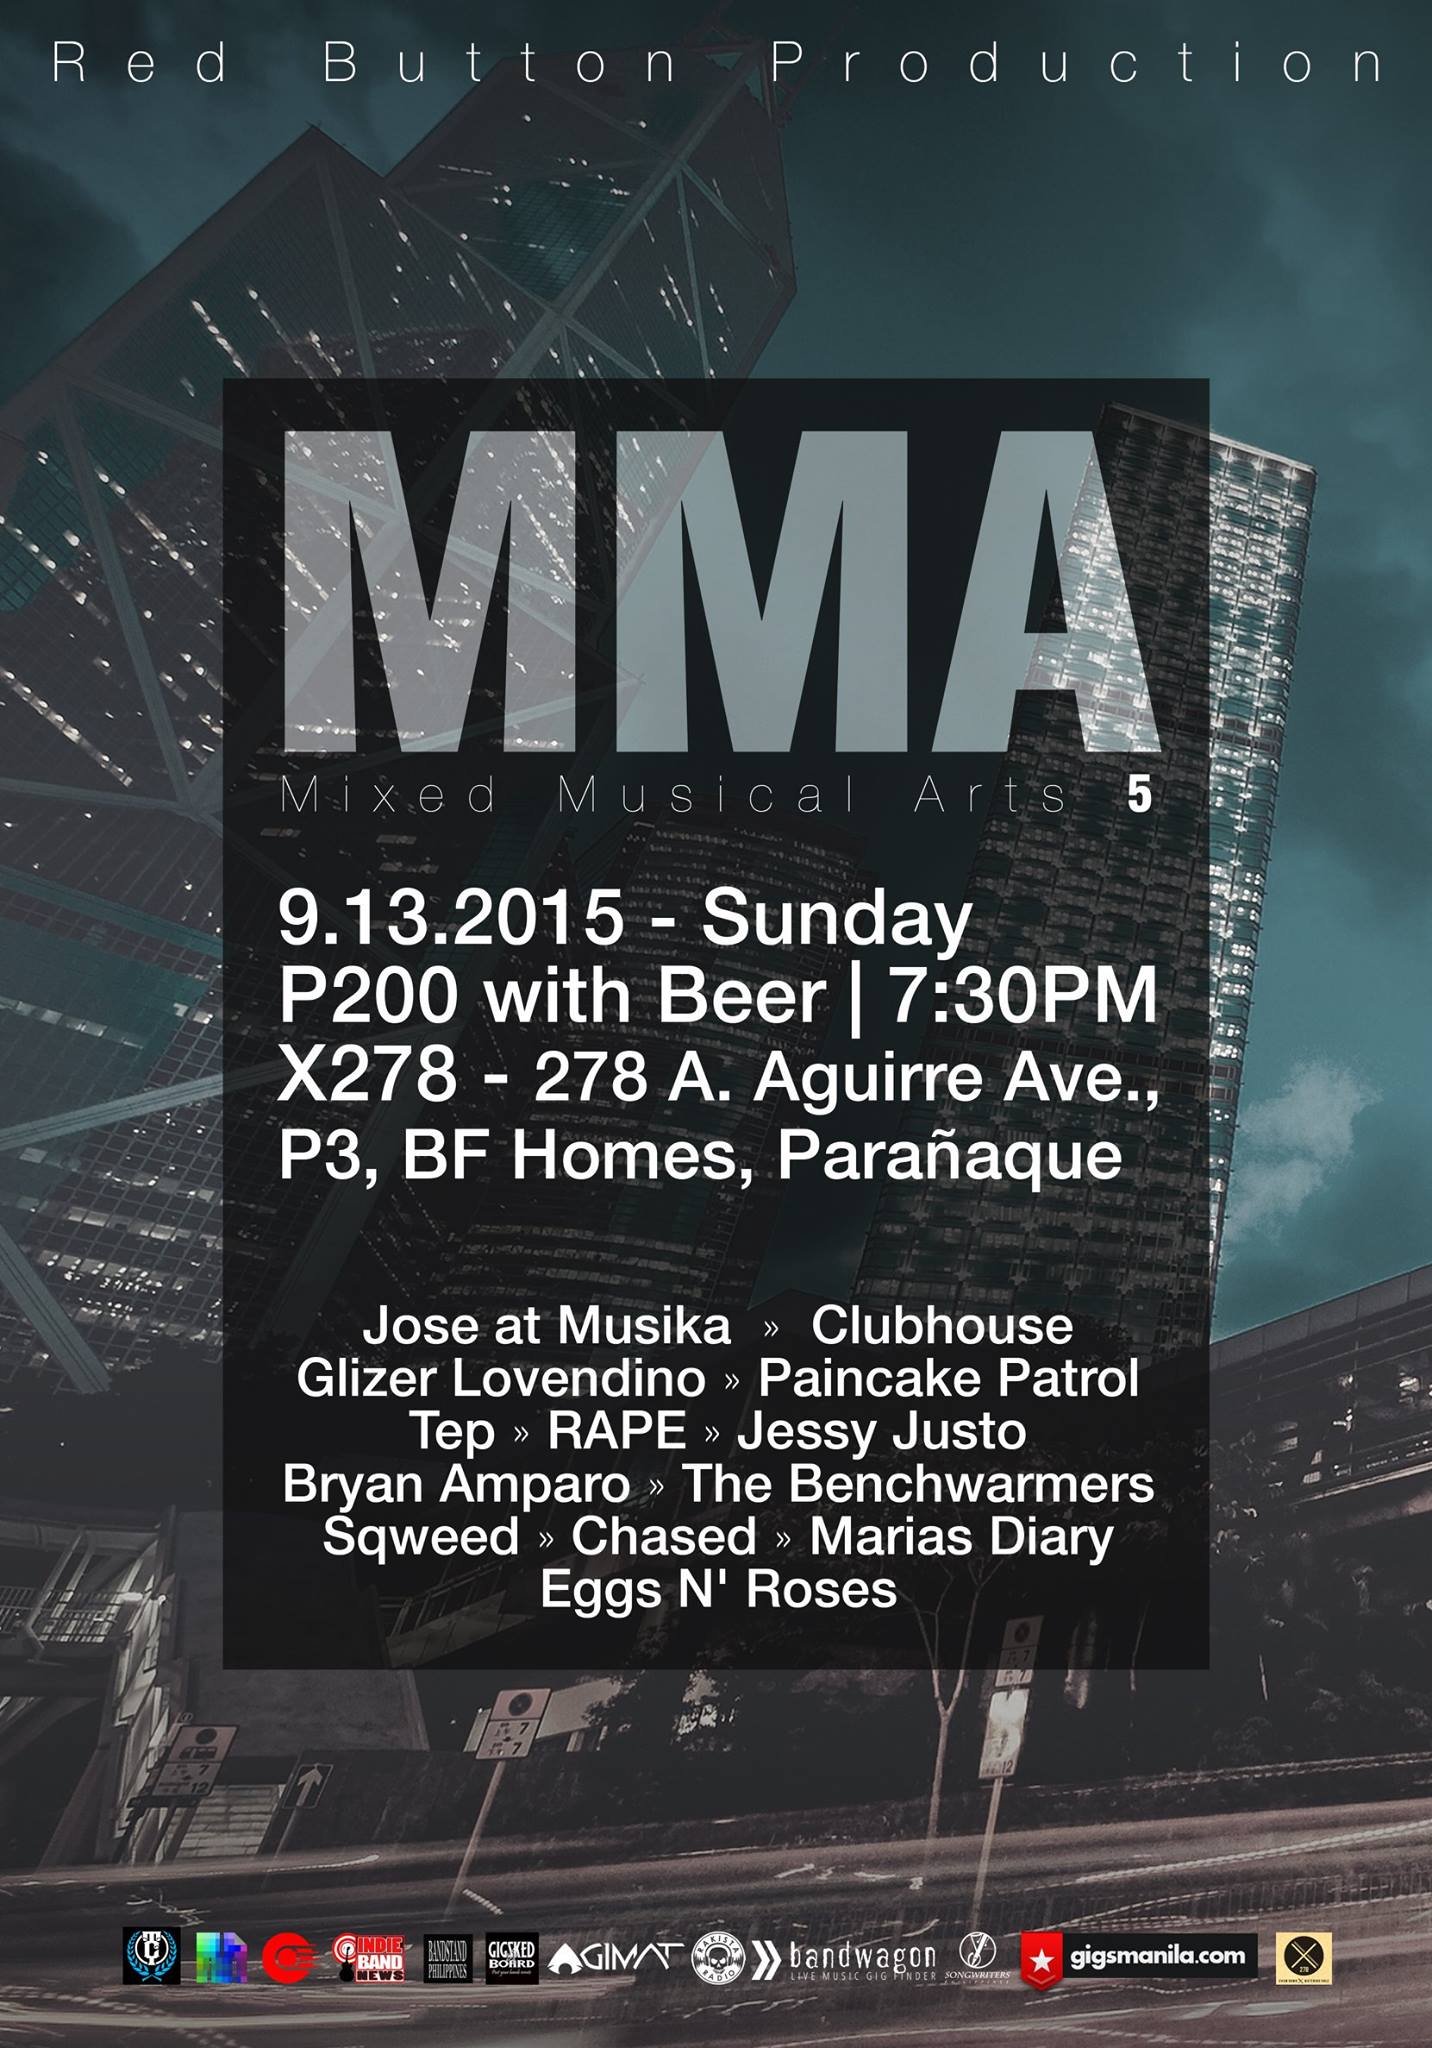 Red Button Production "MMA: Mixed Musical Arts 5" September 13, Sunday | 7PM X278 - 278 A. Aguirre Ave., P3, BF Homes, Parañaque Entrance Fee: P200 with 1 free beer. performances by:  Jose at Musika Clubhouse Glizer Lovendino  Paincake Patrol Tep  RAPE Jessy Justo Bryan Amparo The Benchwarmers Sqweed Chased Marias Diary Eggs N' Roses Event Link: https://www.facebook.com/events/688848737882389/